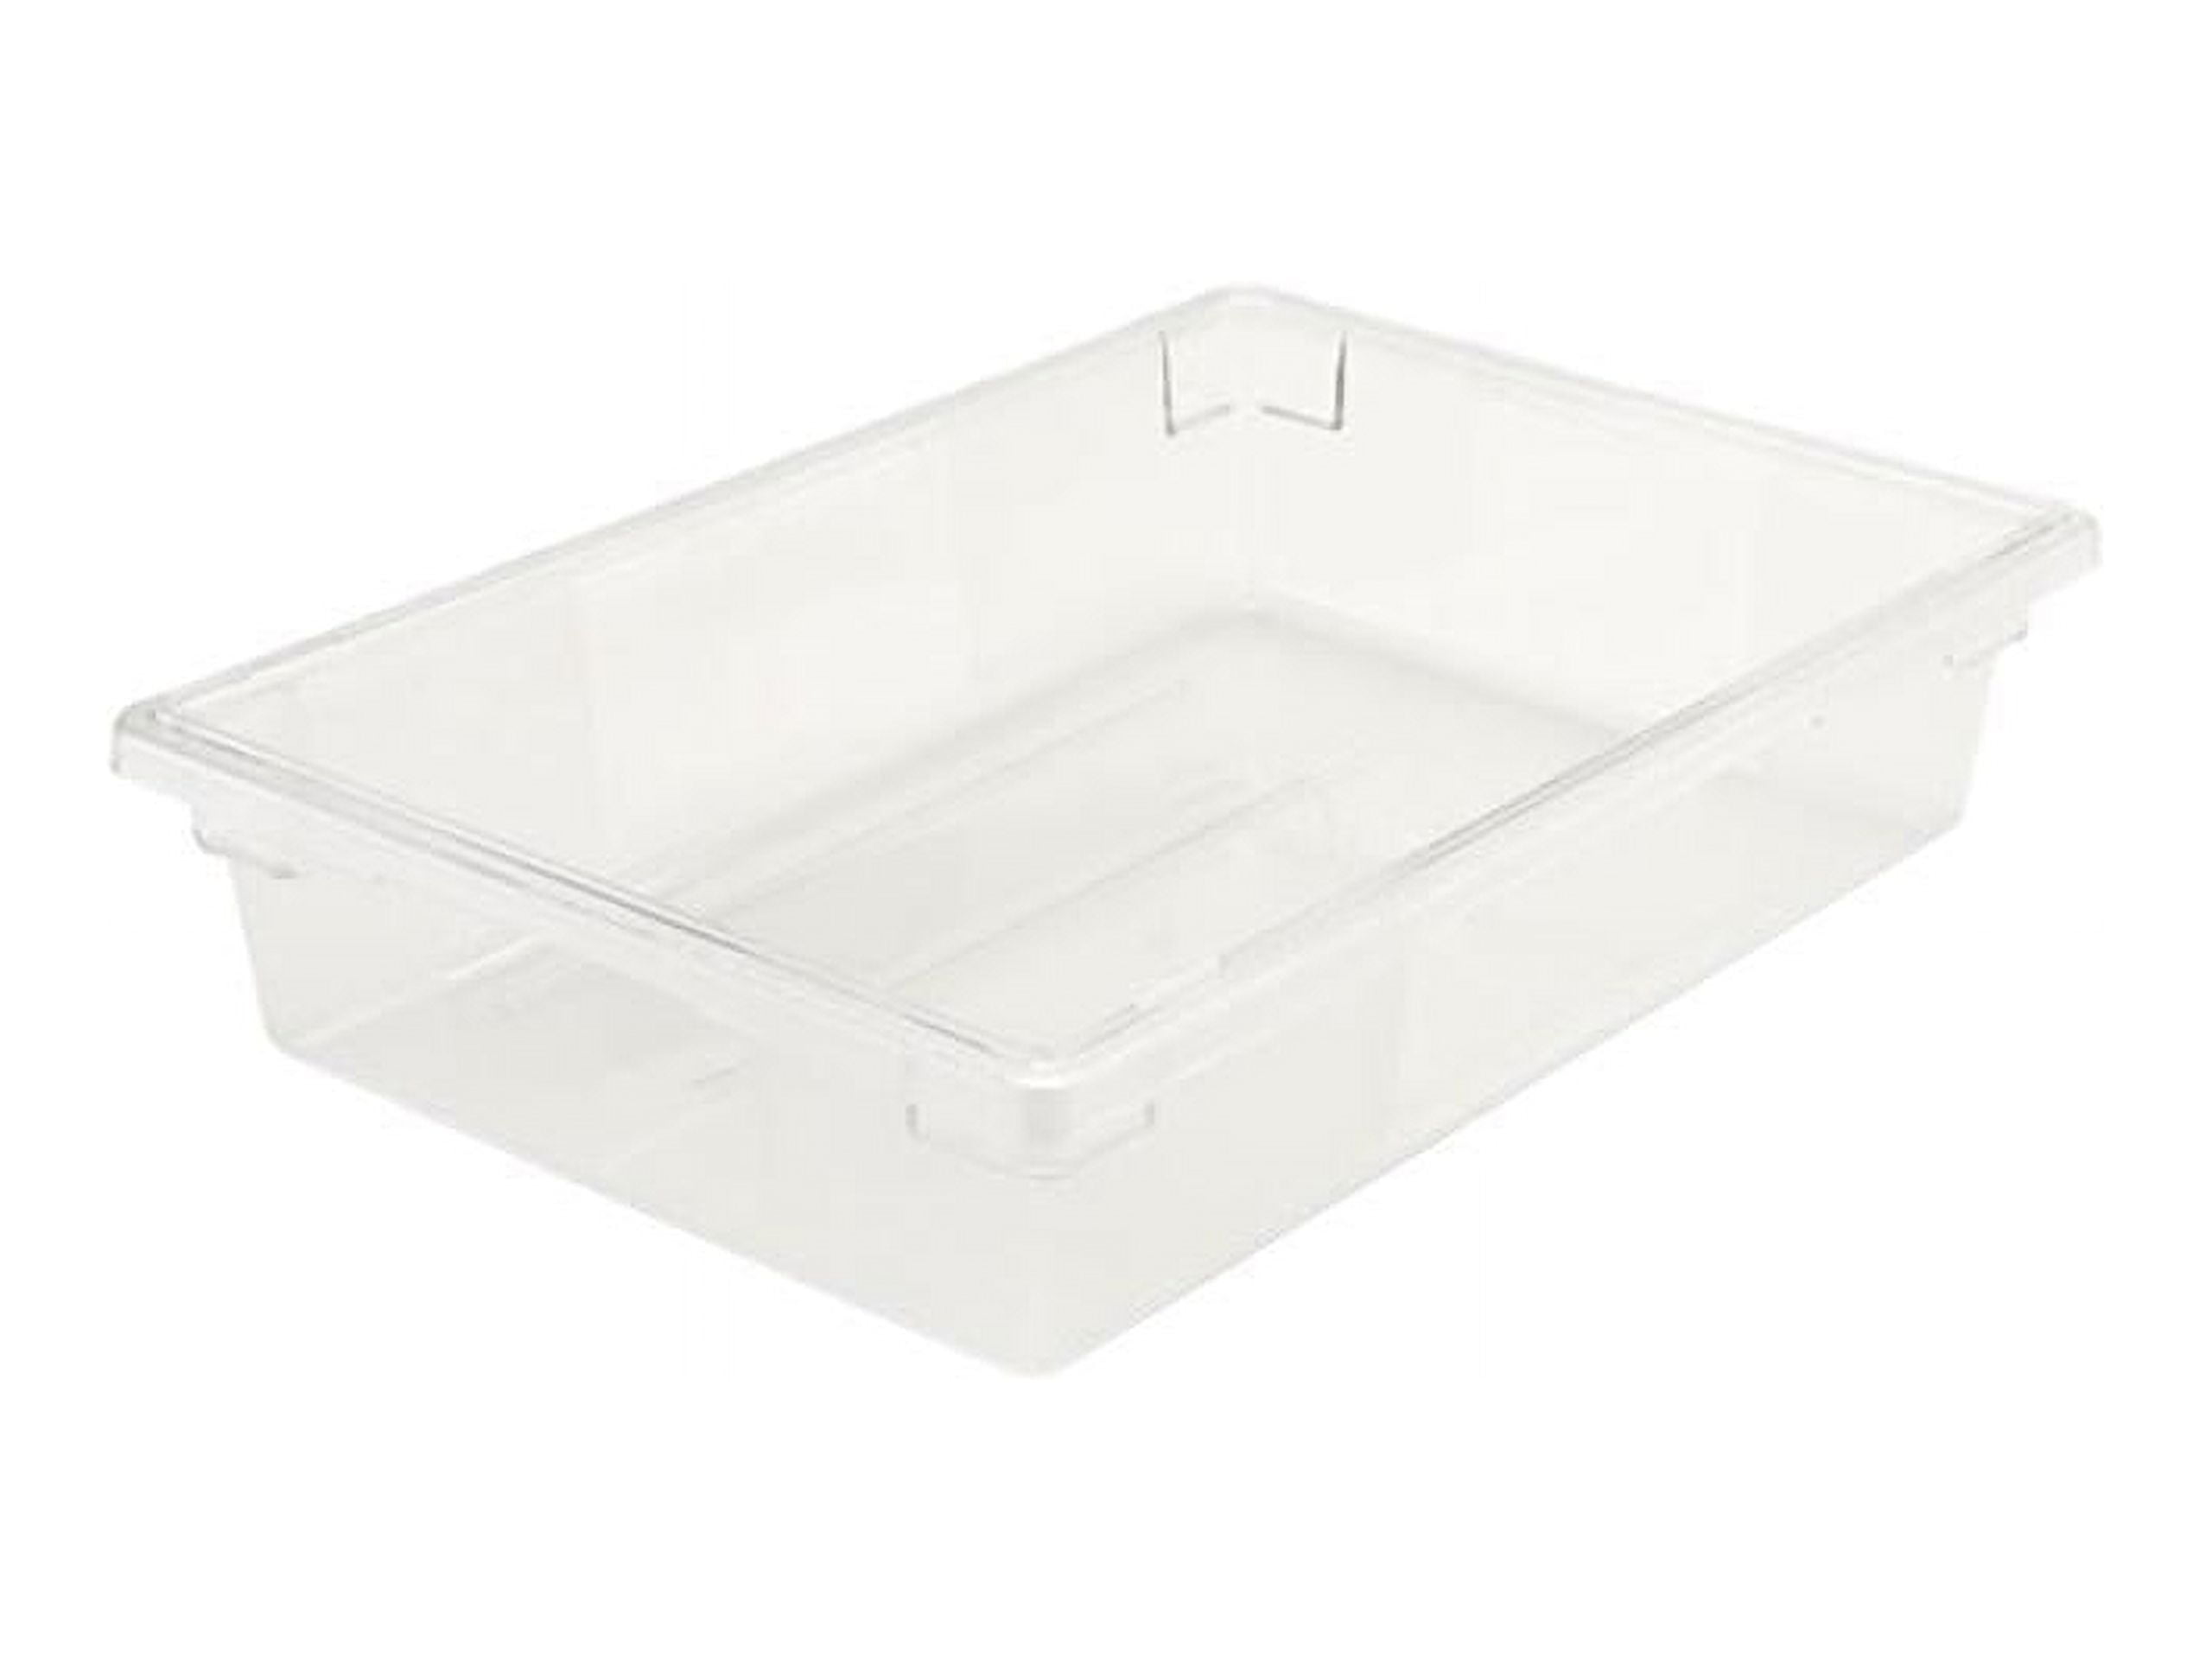 Rubbermaid - Food Tote Box Container: Polycarbonate, Rectangular - 71464101  - MSC Industrial Supply